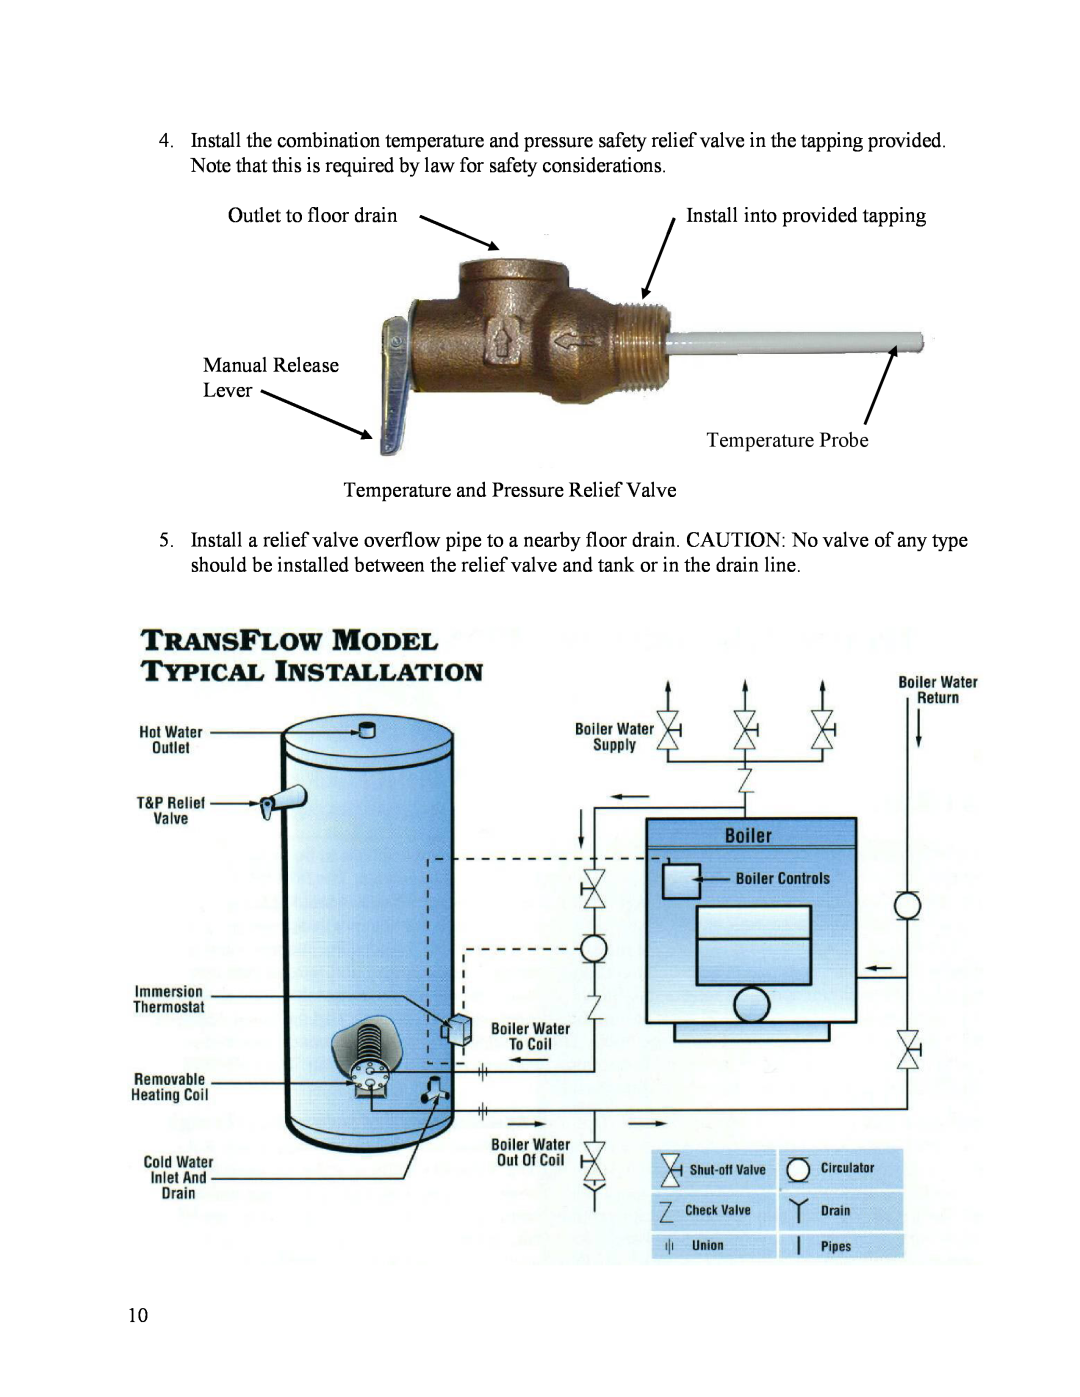 Hubbell Electric Heater Company T manual Outlet to floor drain, Install into provided tapping 